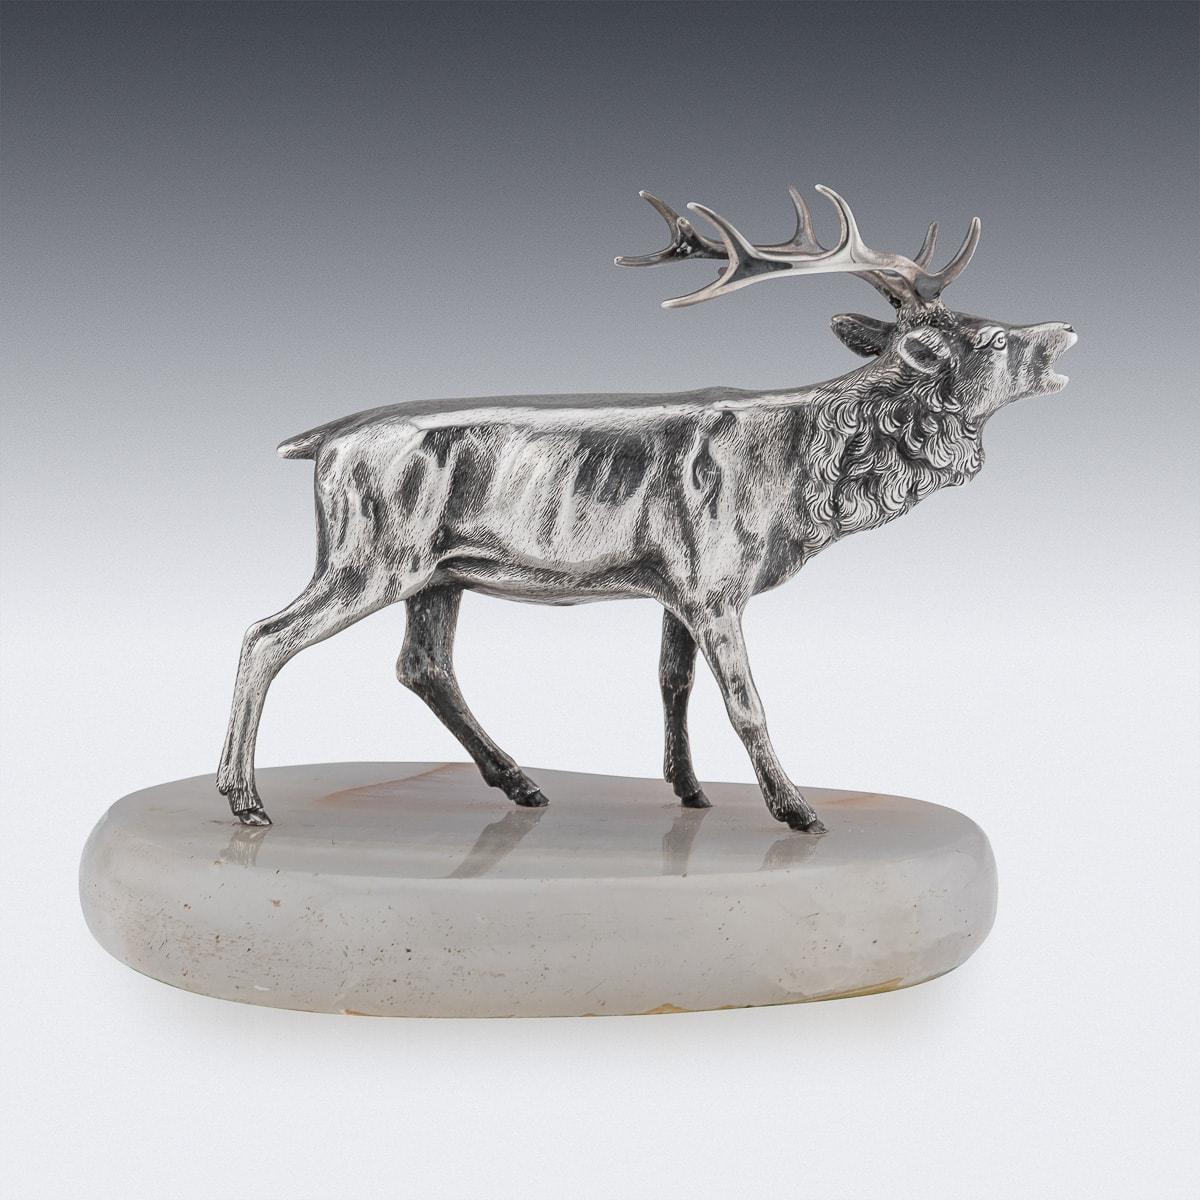 20th Century German Renaissance Style Solid Silver Model Of A Stag c.1913 In Good Condition For Sale In Royal Tunbridge Wells, Kent